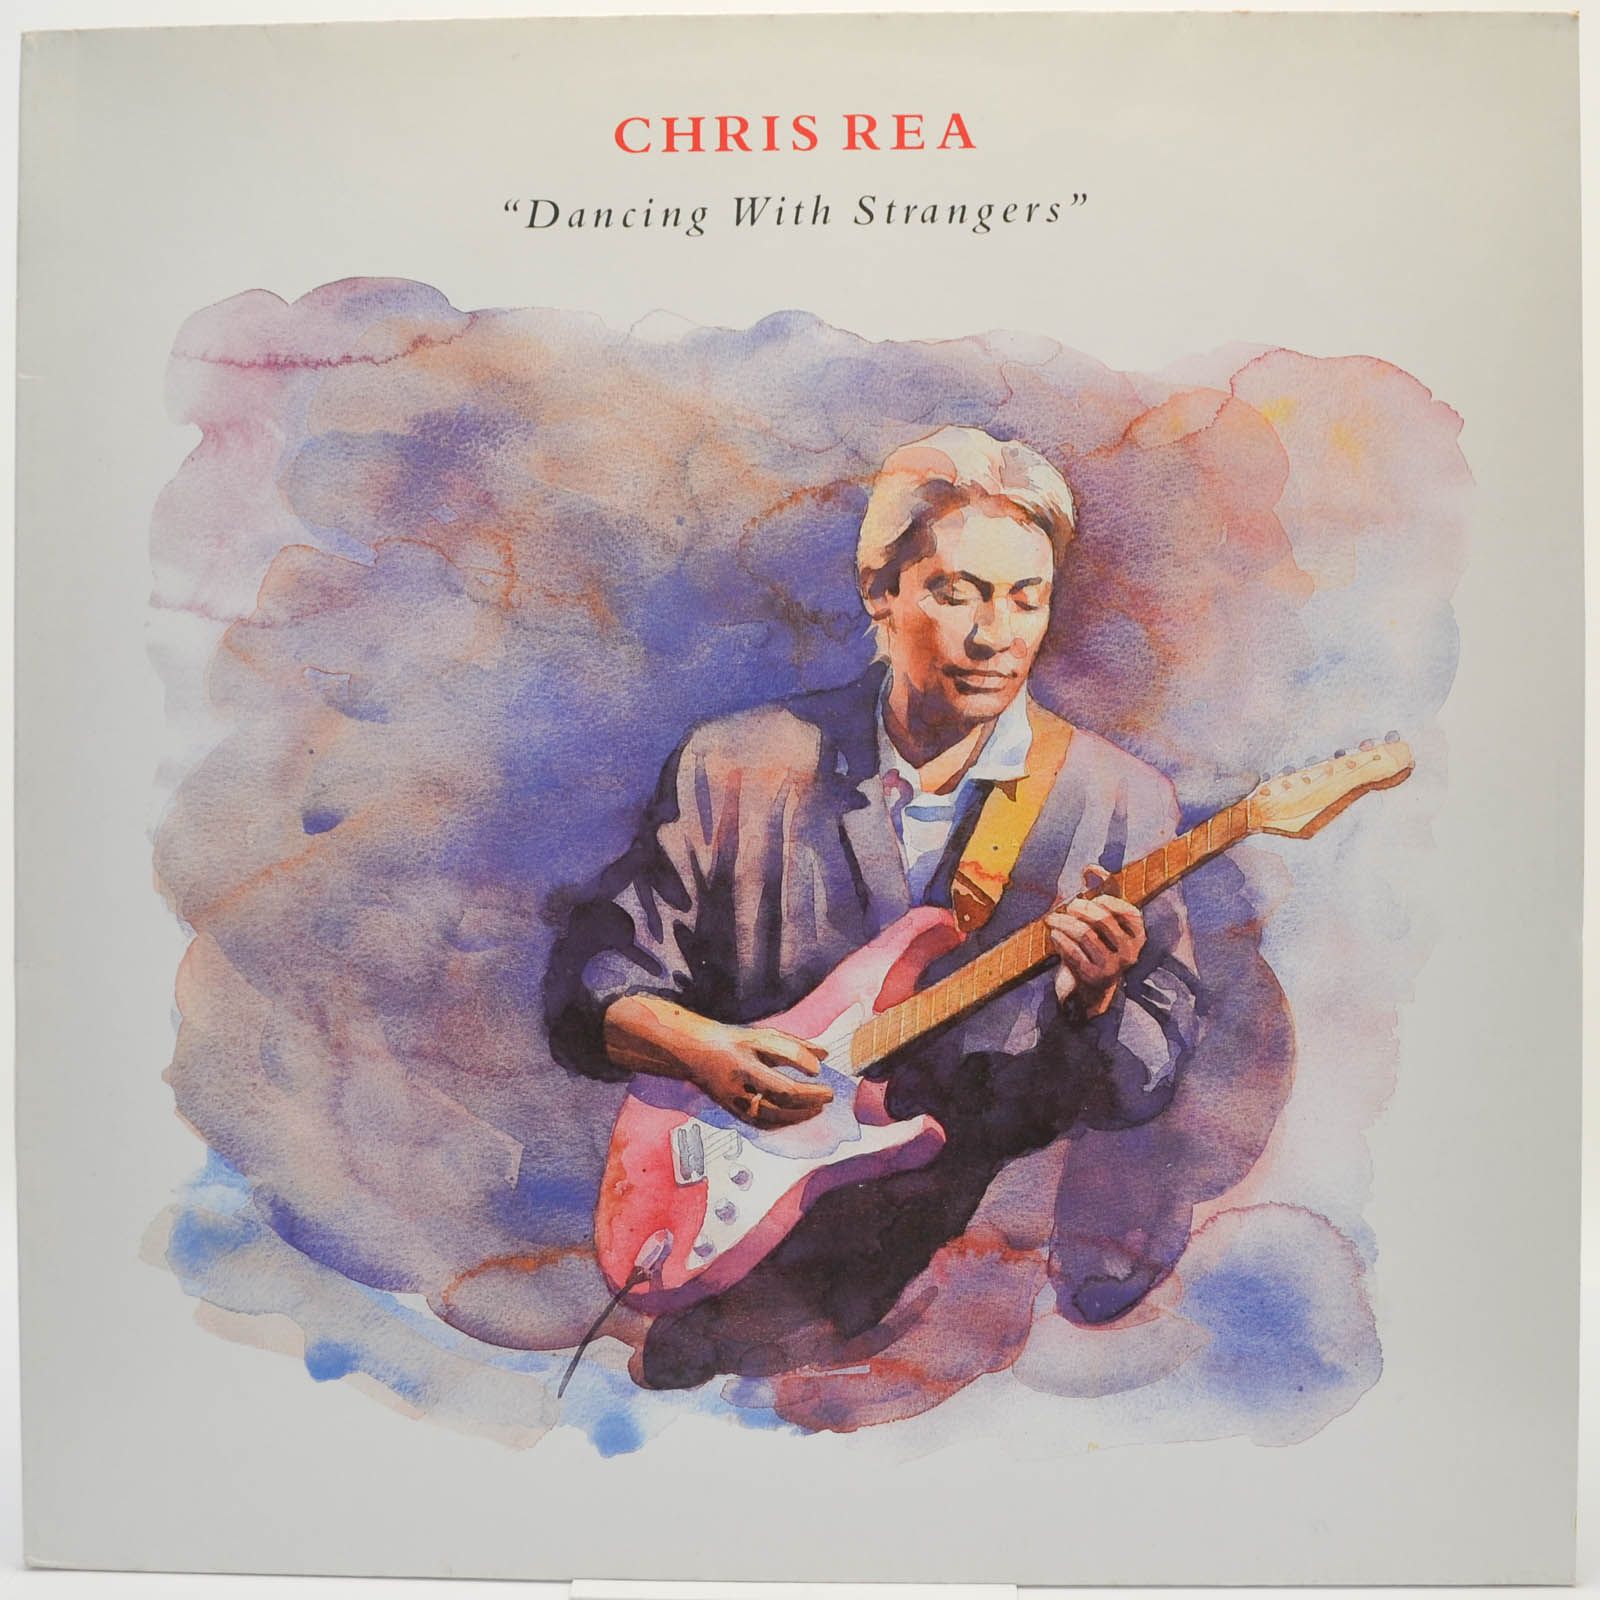 Chris Rea — Dancing With Strangers, 1987